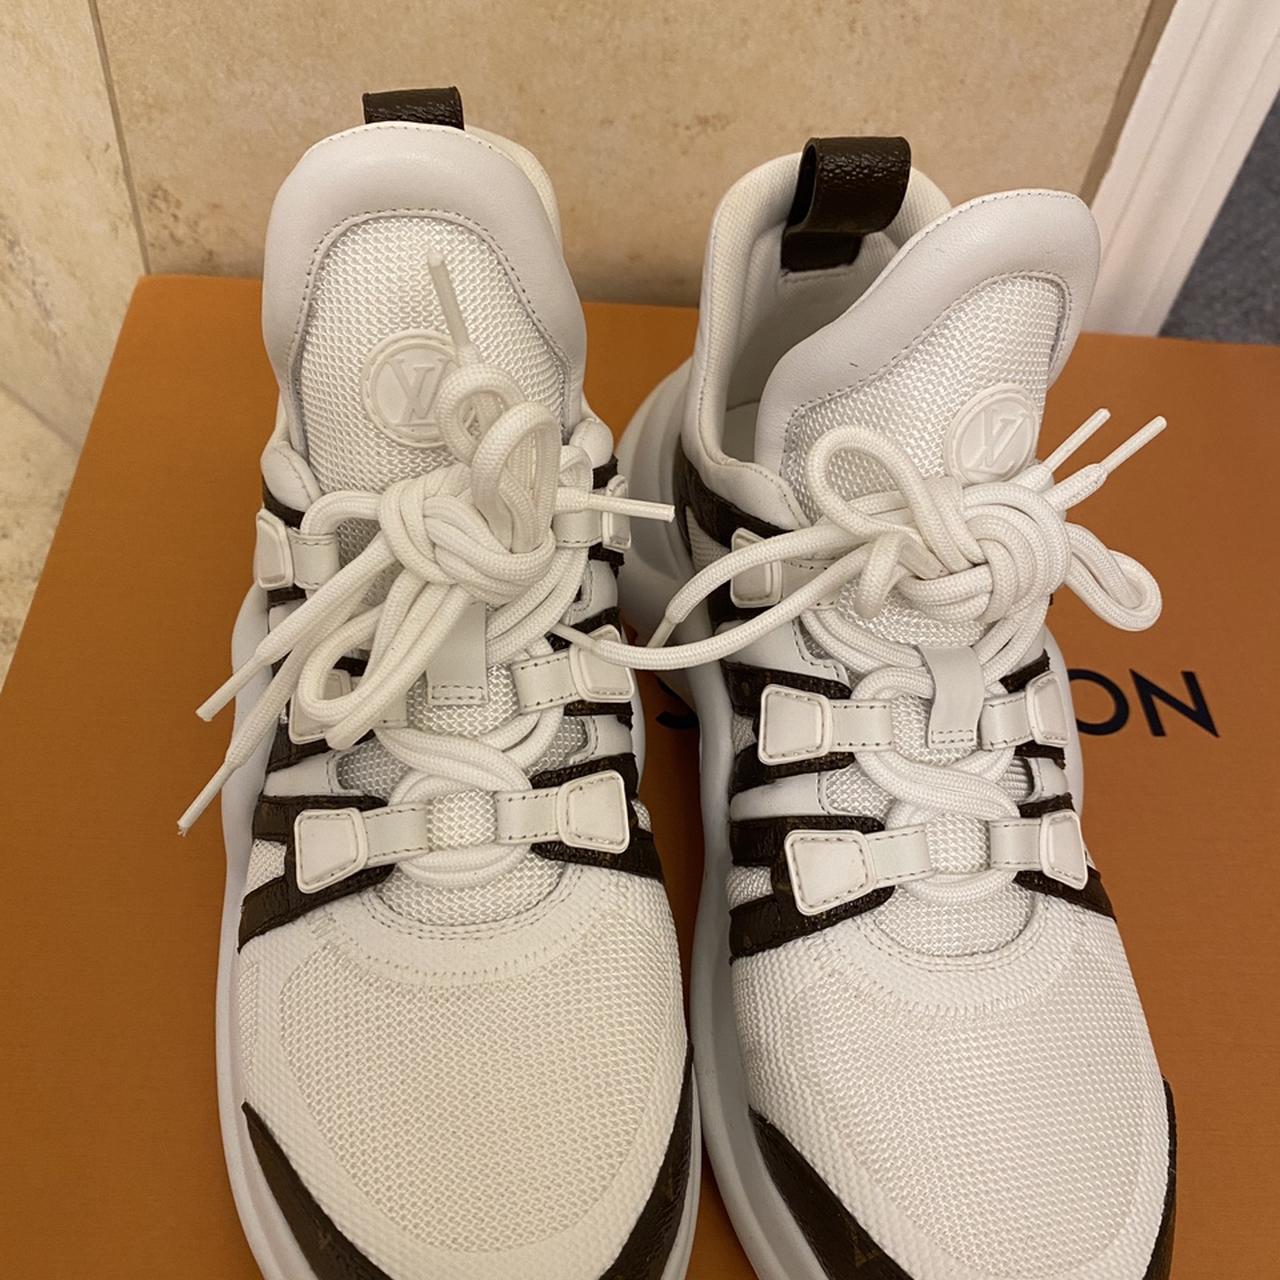 AUTHENTIC LOUIS VUITTON ARCHLIGHT SNEAKERS IN A SIZE - Depop